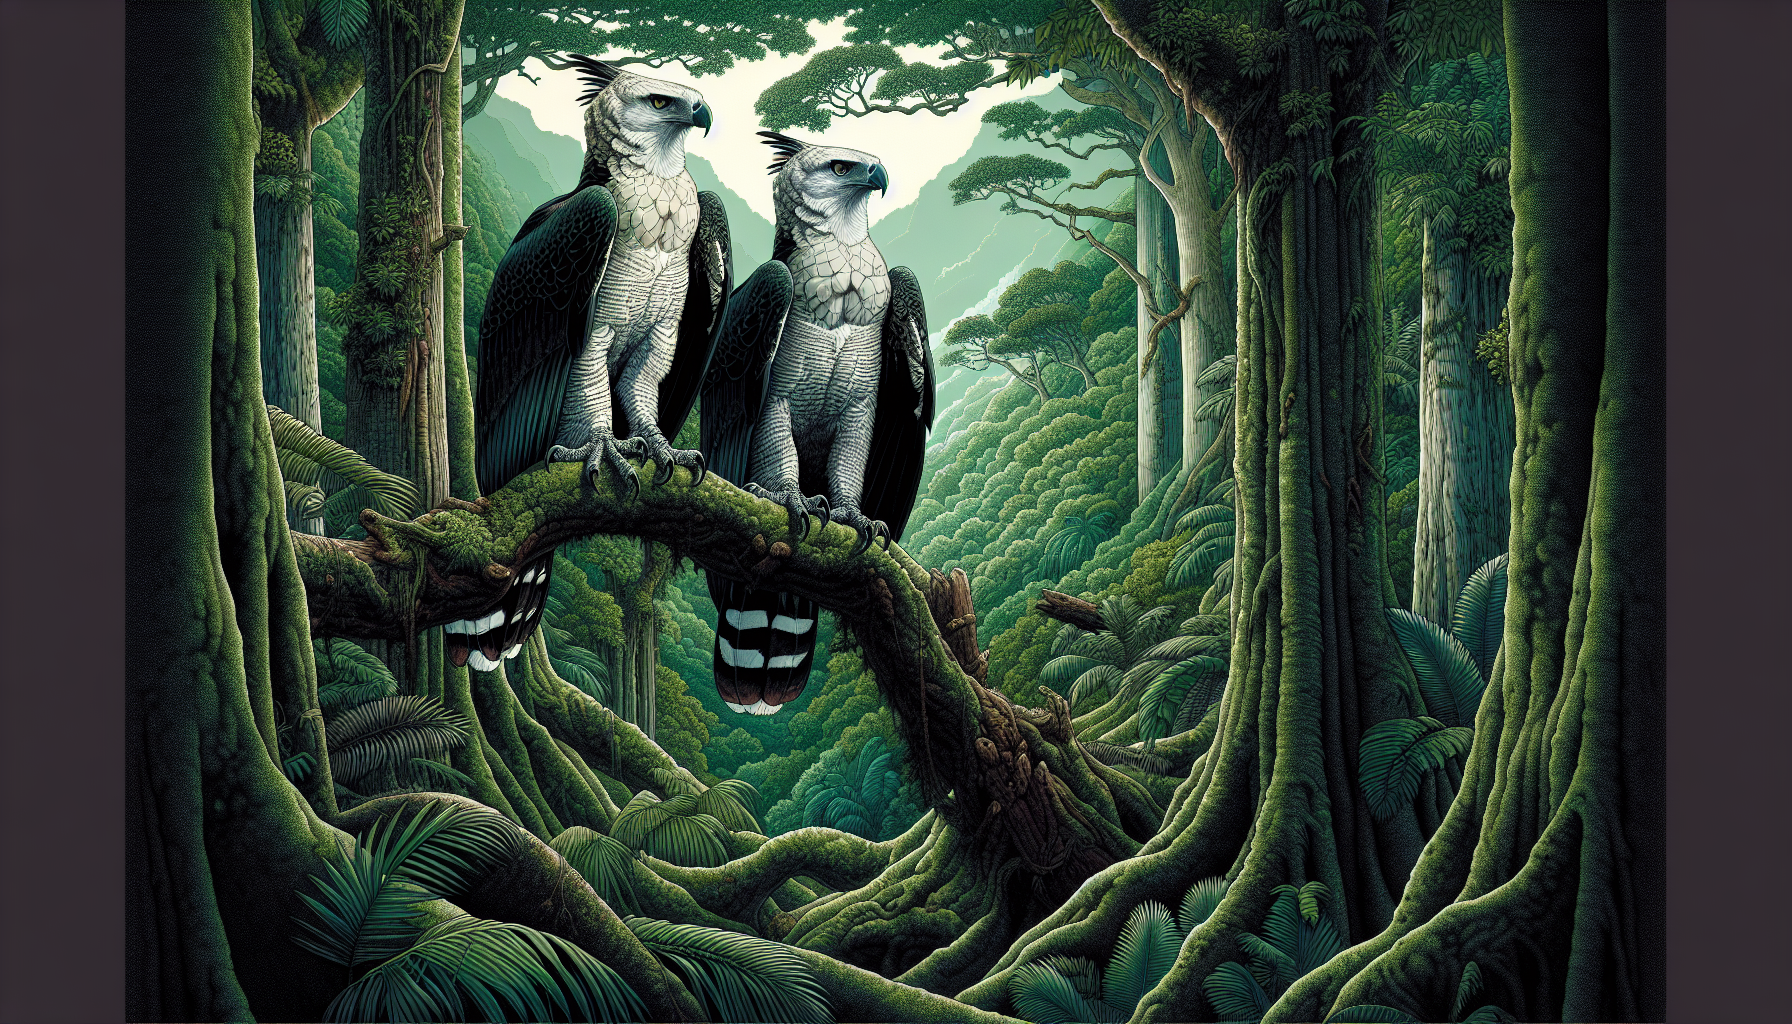 Illustration depicting a pair of harpy eagles in their natural habitat within the forest canopy